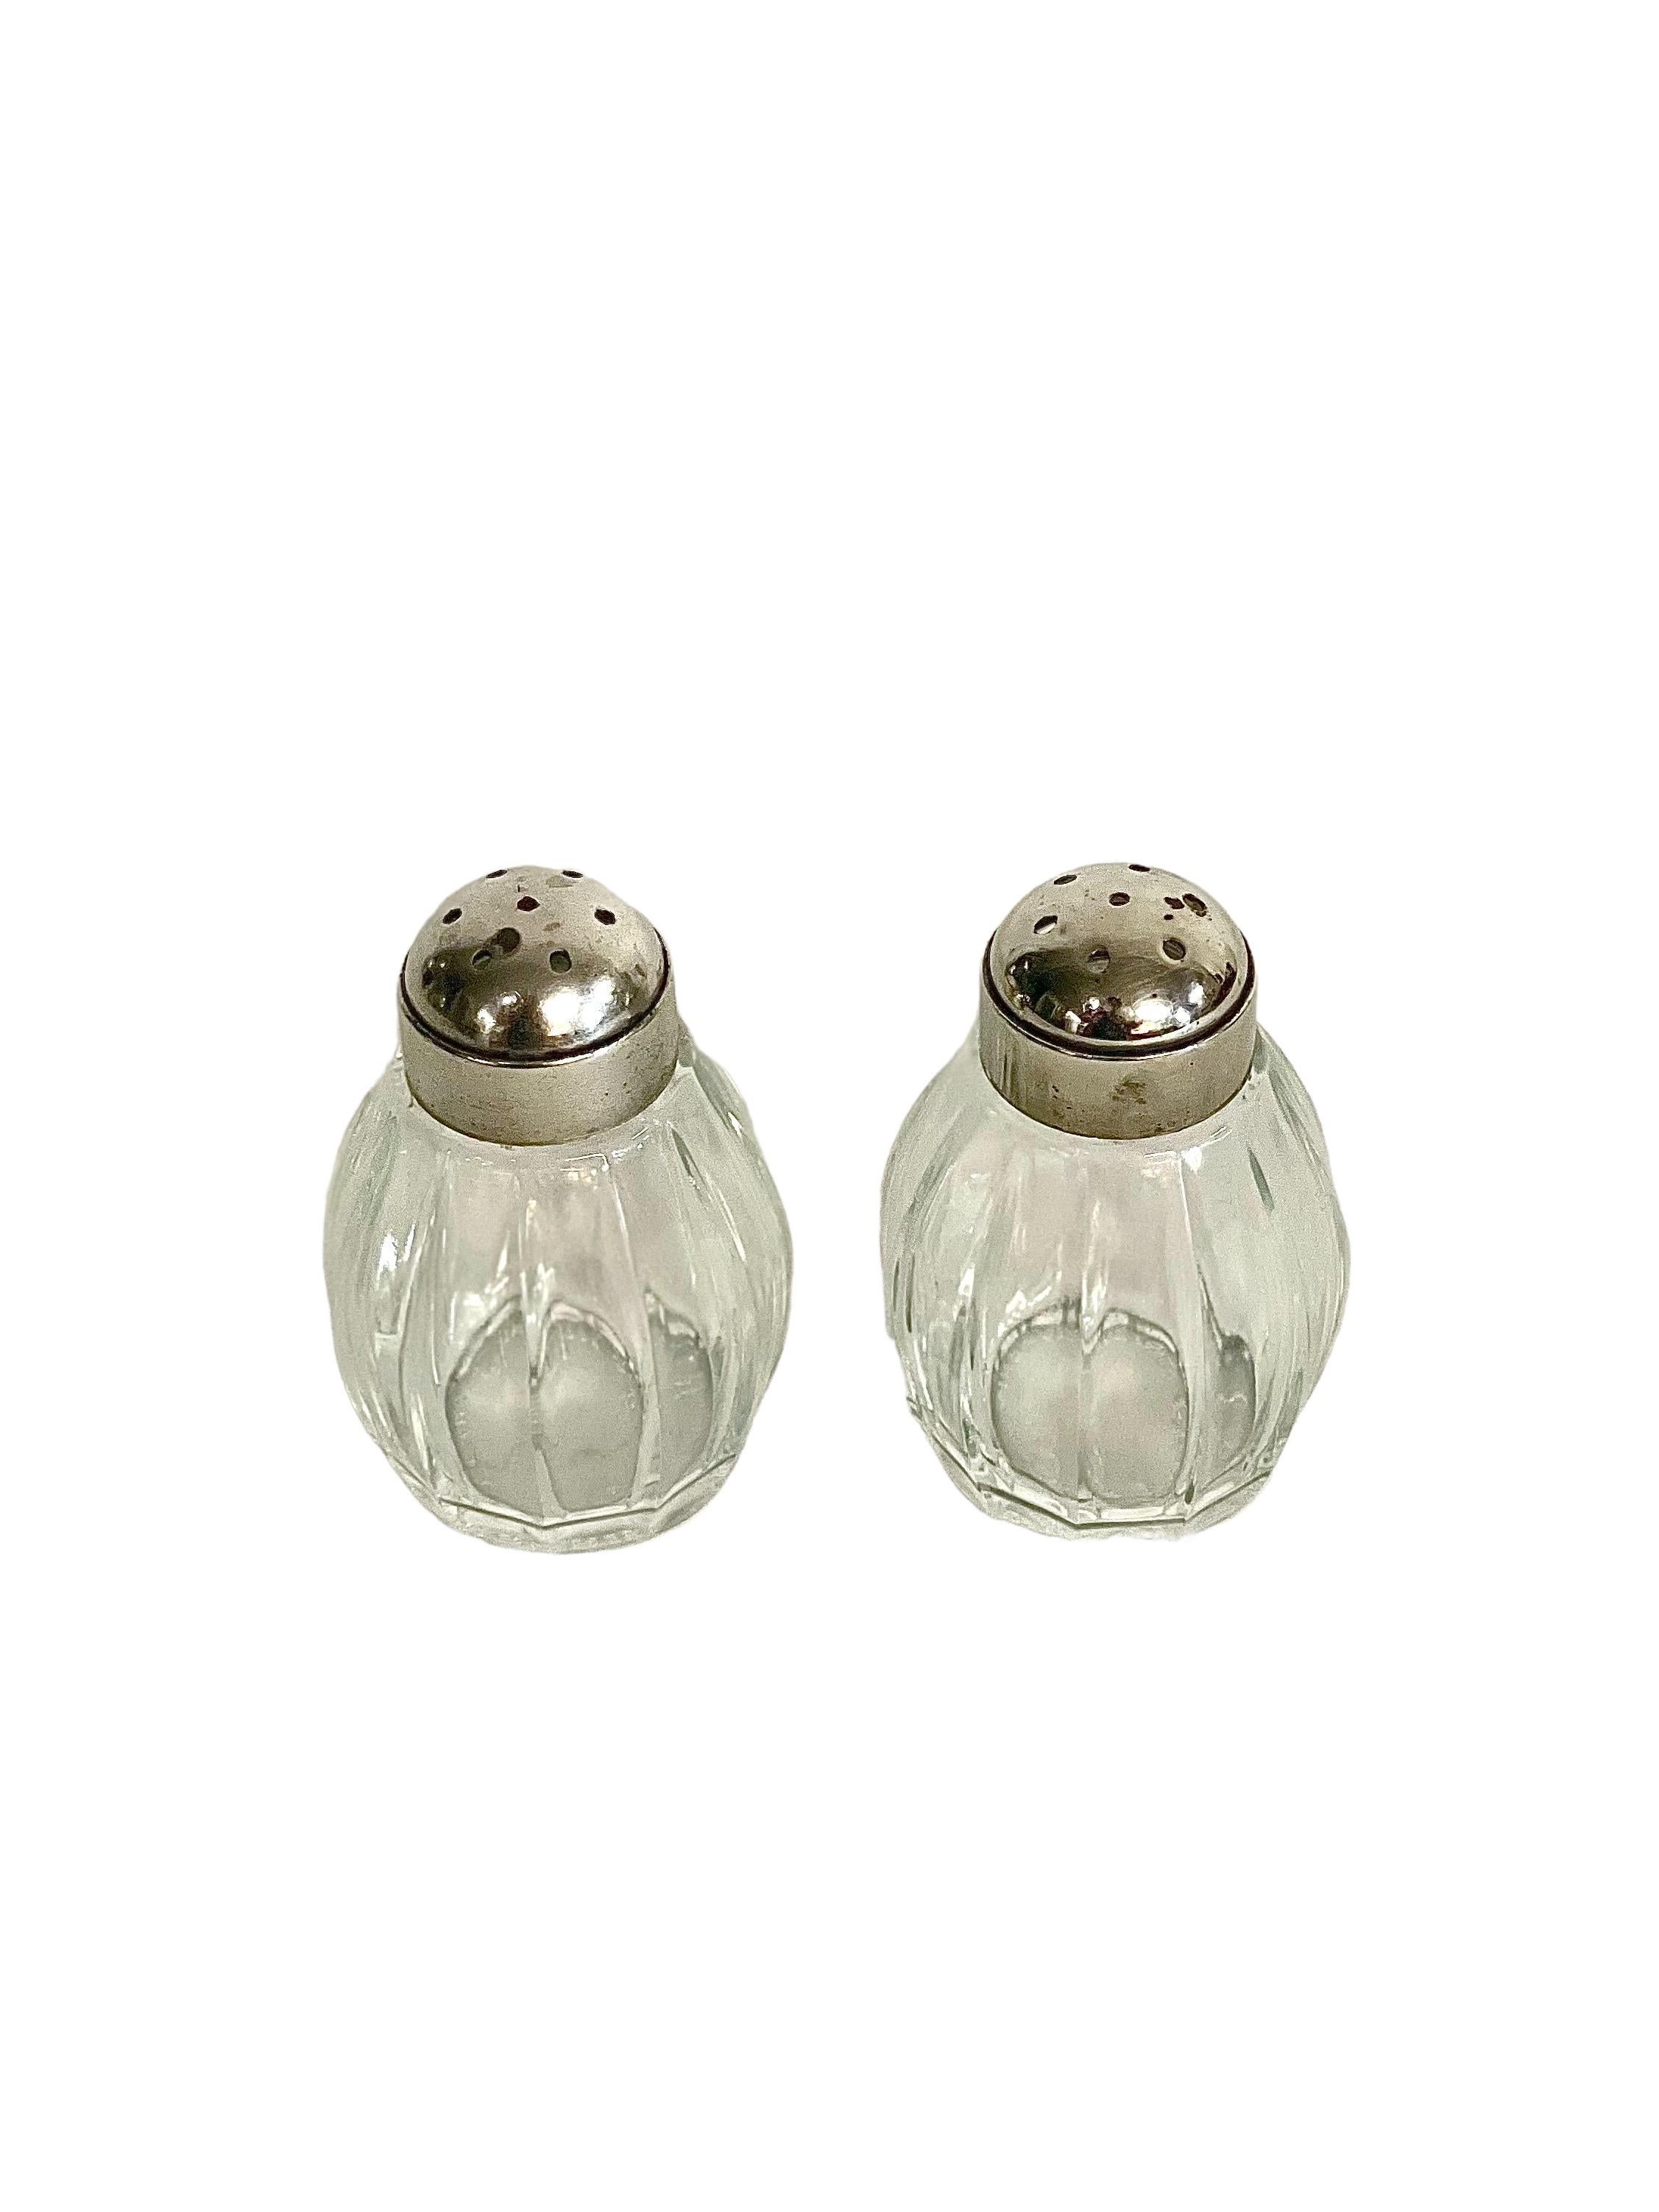 A stylish duo of Christofle Art Deco style salt and pepper shakers, with fluted crystal barrels and silver sterling screw-on lids. Dating from around the 1960s, each shaker unscrews for ease of refilling, and is stamped Christofle on the top and